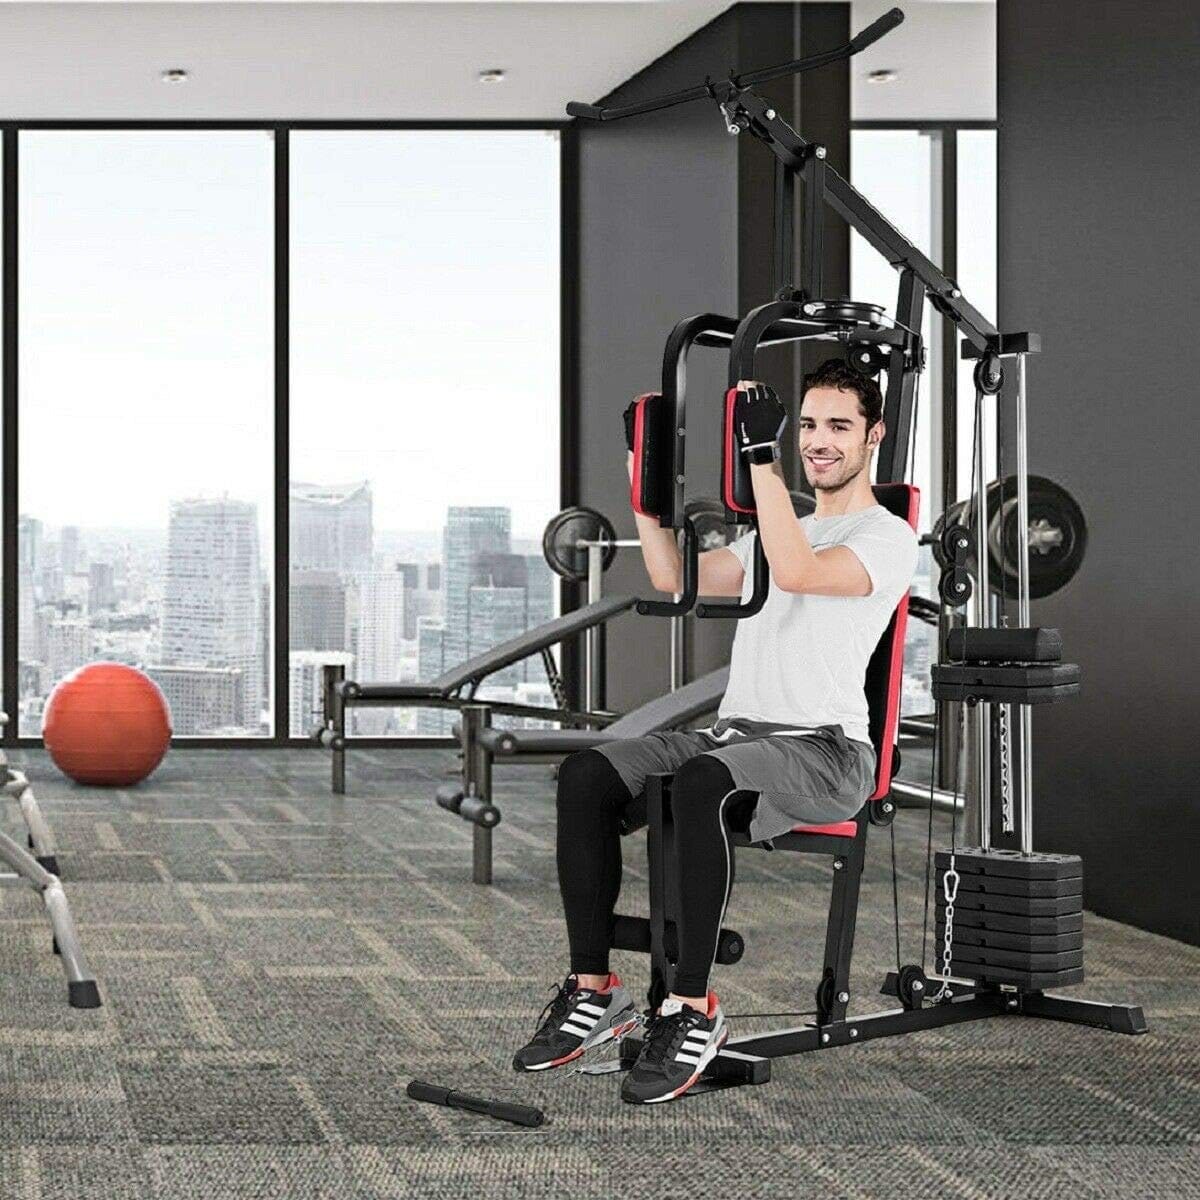 You are currently viewing Comparing 3 Home Gym Systems: Strength, Fitness, and Leg Training